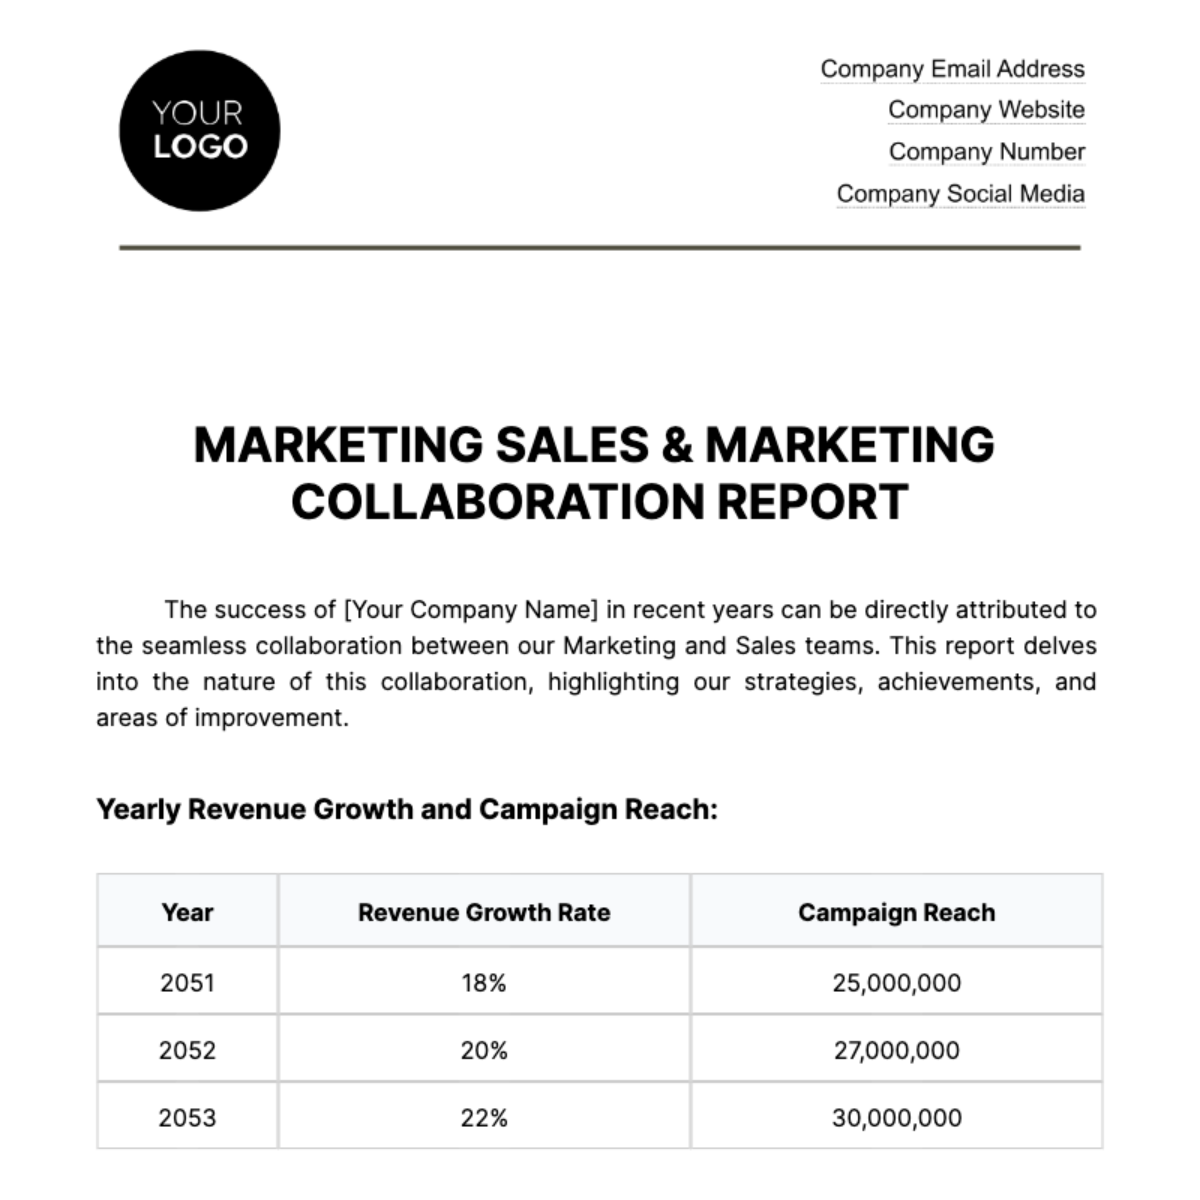 Marketing Sales & Marketing Collaboration Report Template